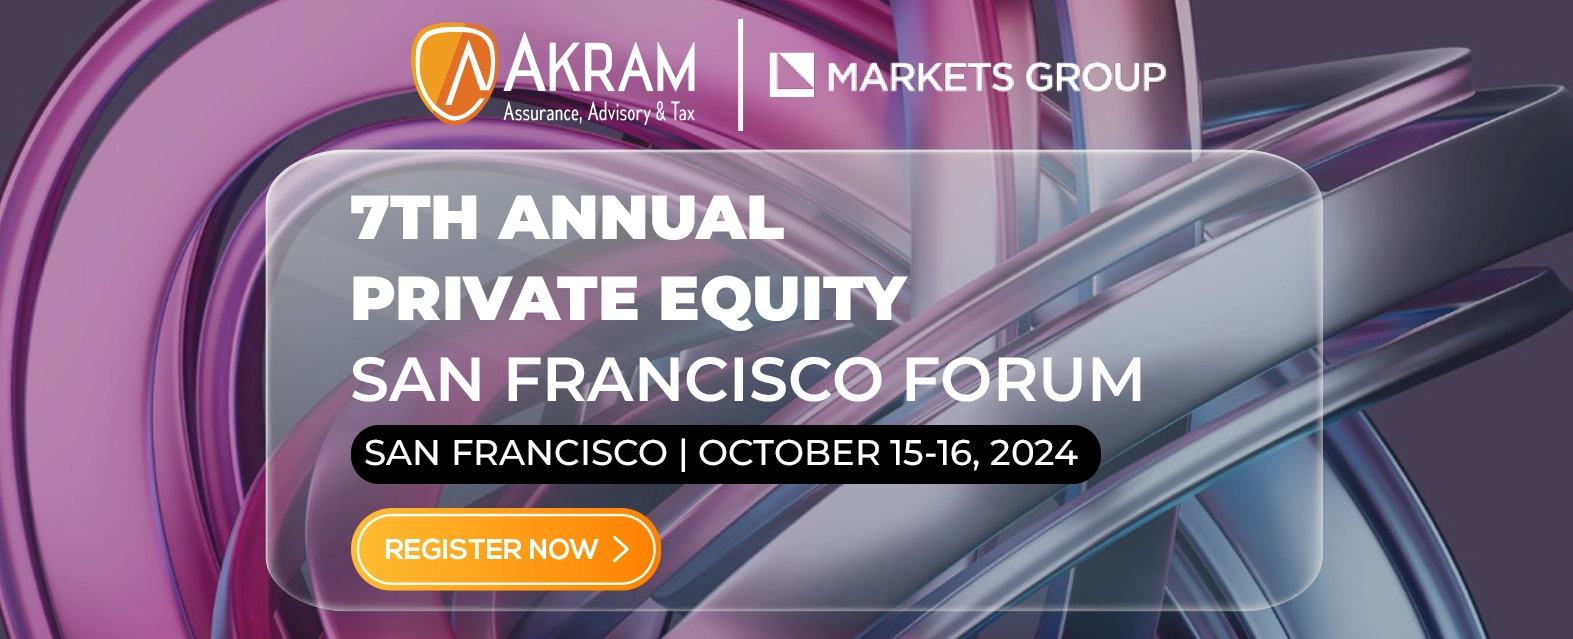 A7th Annual Private Equity San Francisco Forum 2024